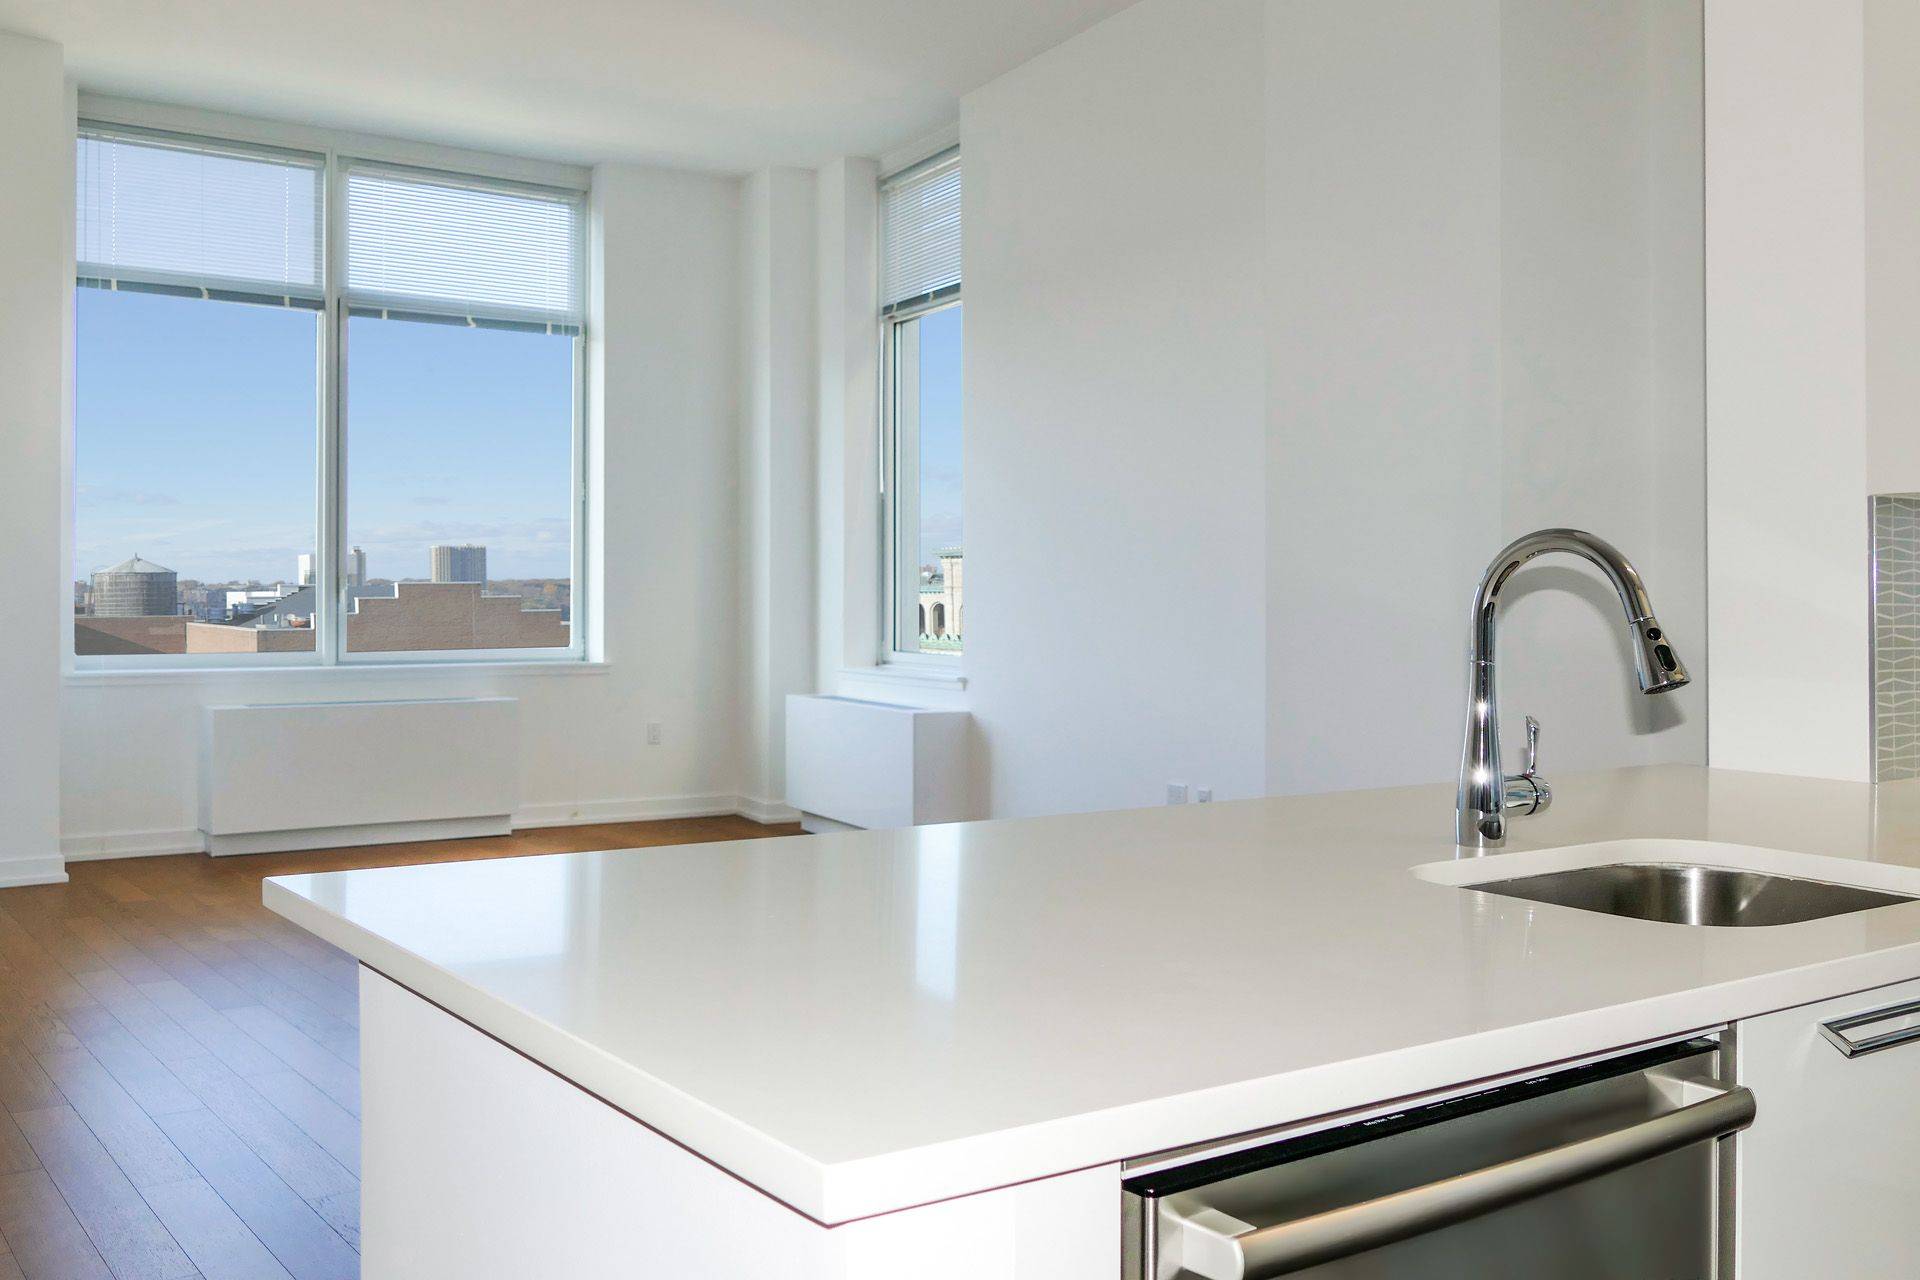 Corner two bedroom with open views across Broadway and 77th Street.